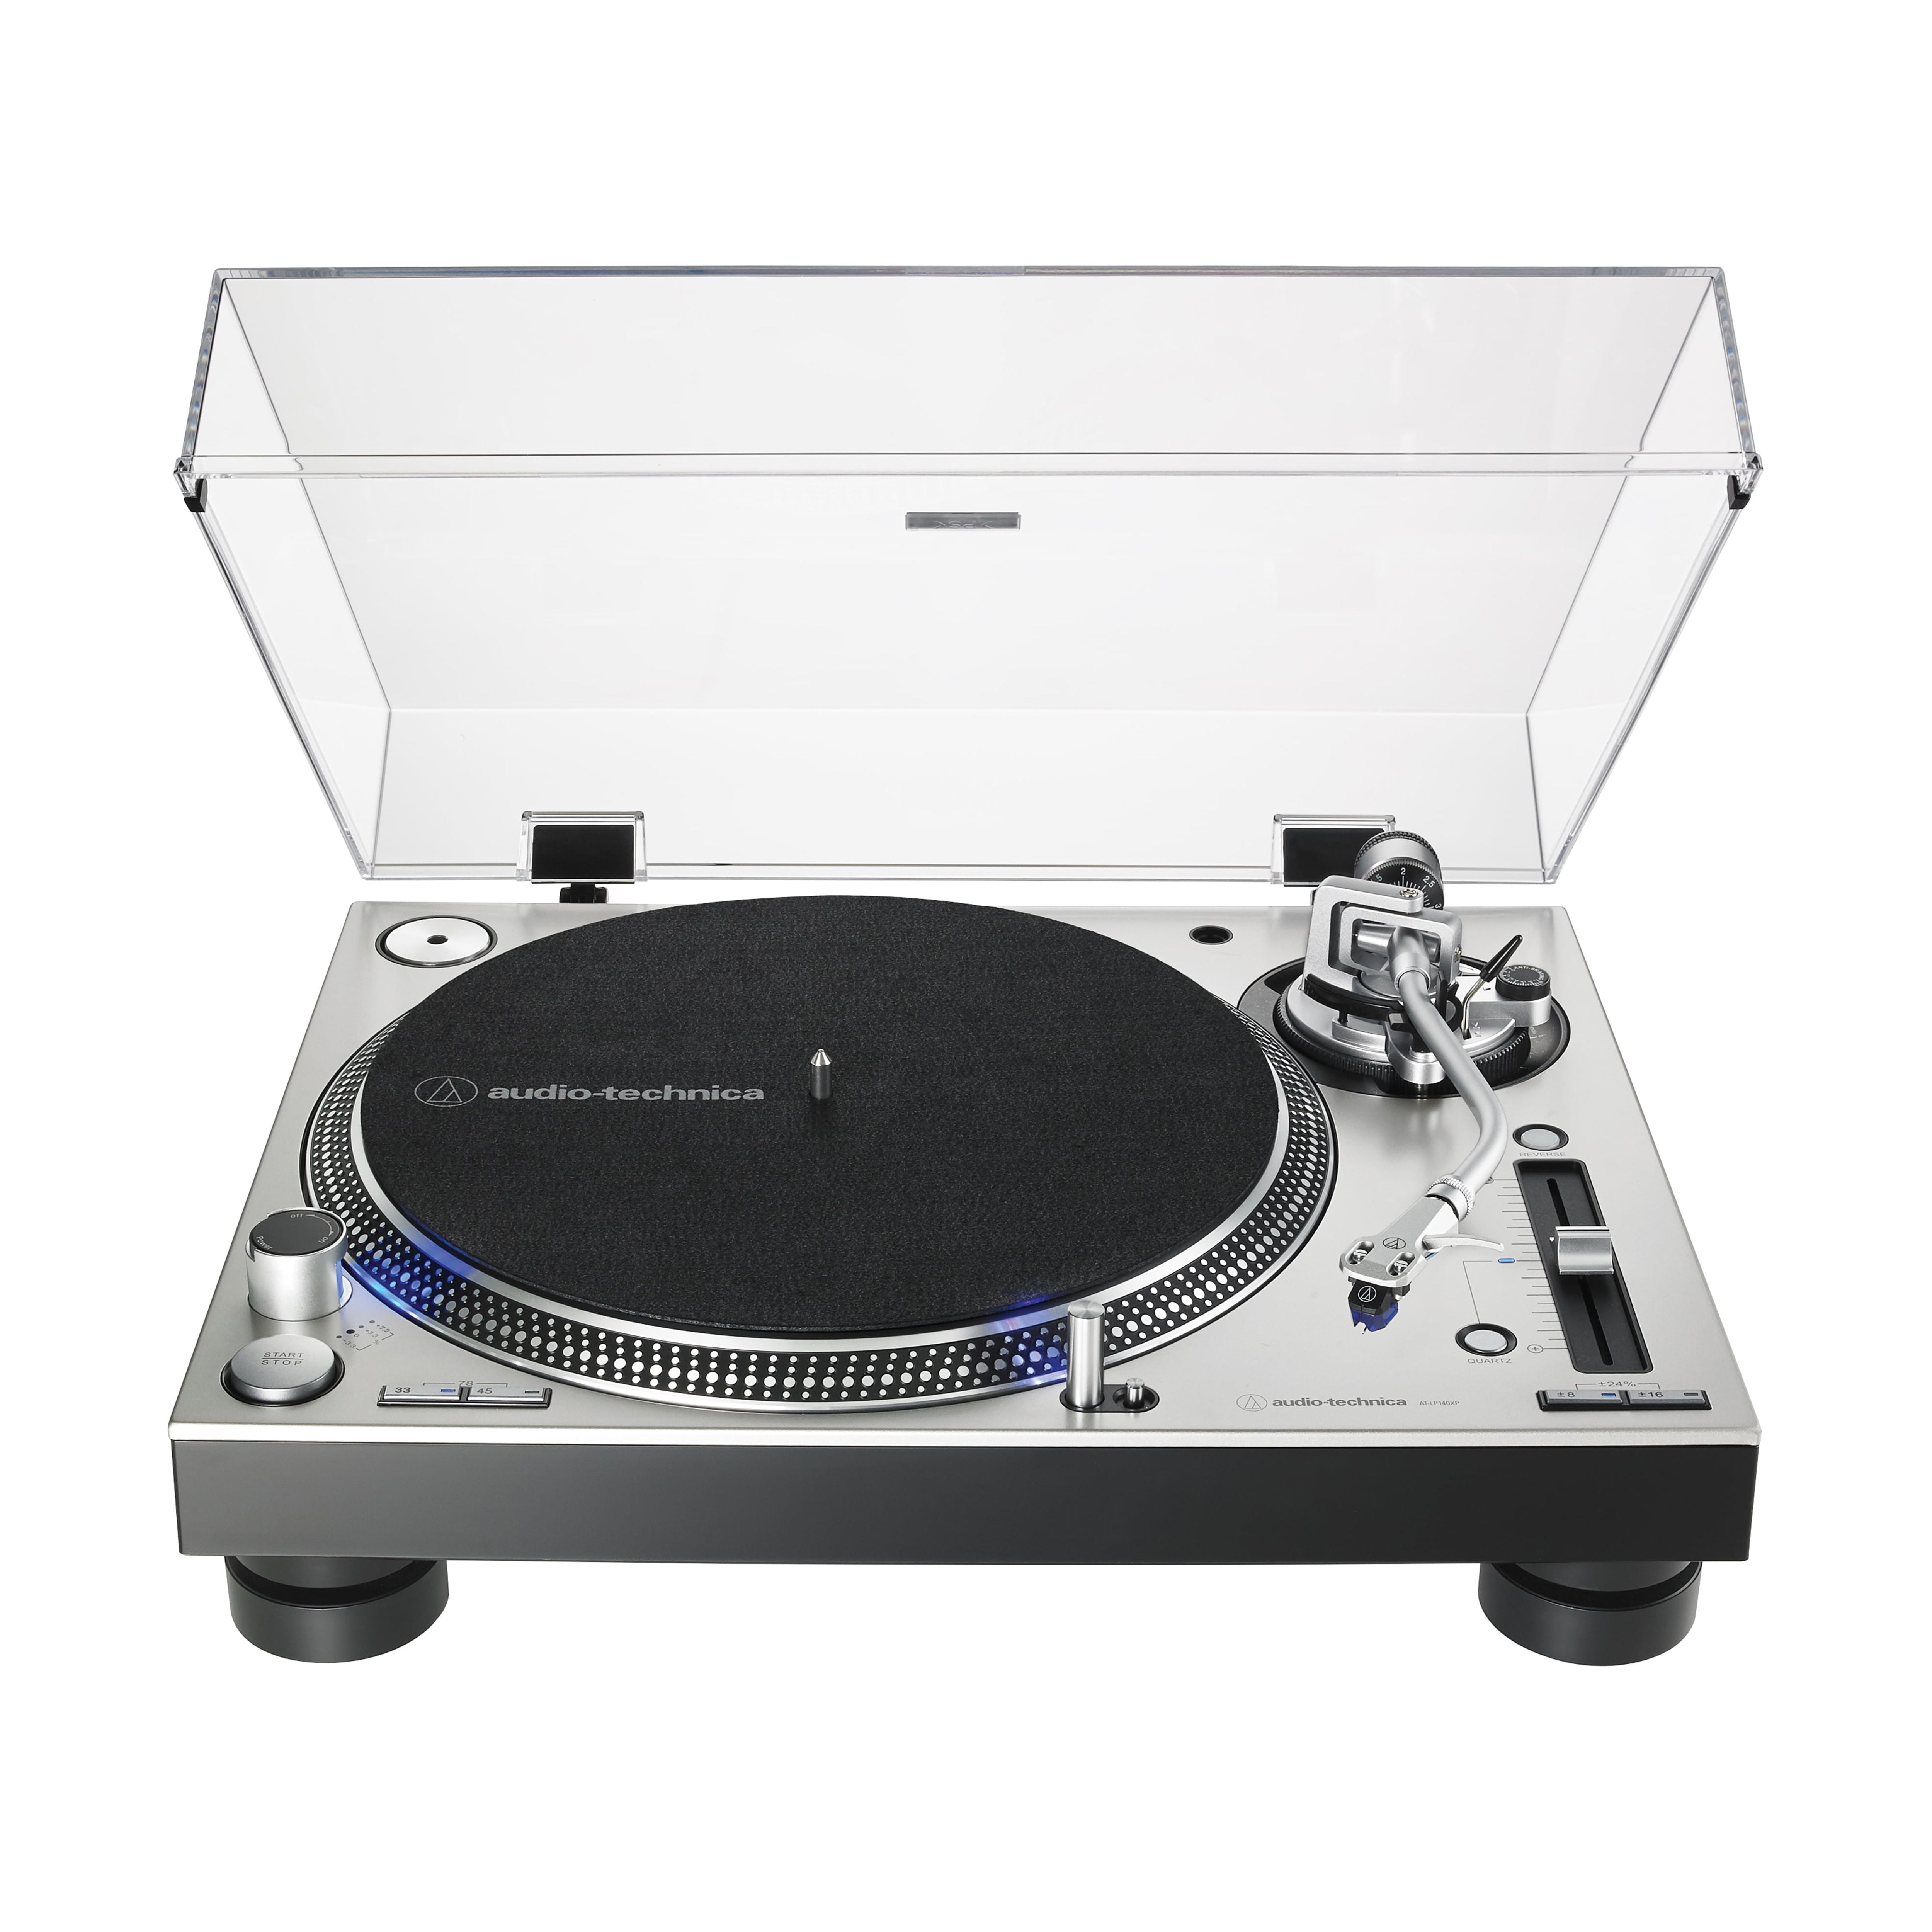 WHICH TURNTABLE TO BUY ??? ○ Audio-Technica AT-LP5X vs AT-LP140XP 